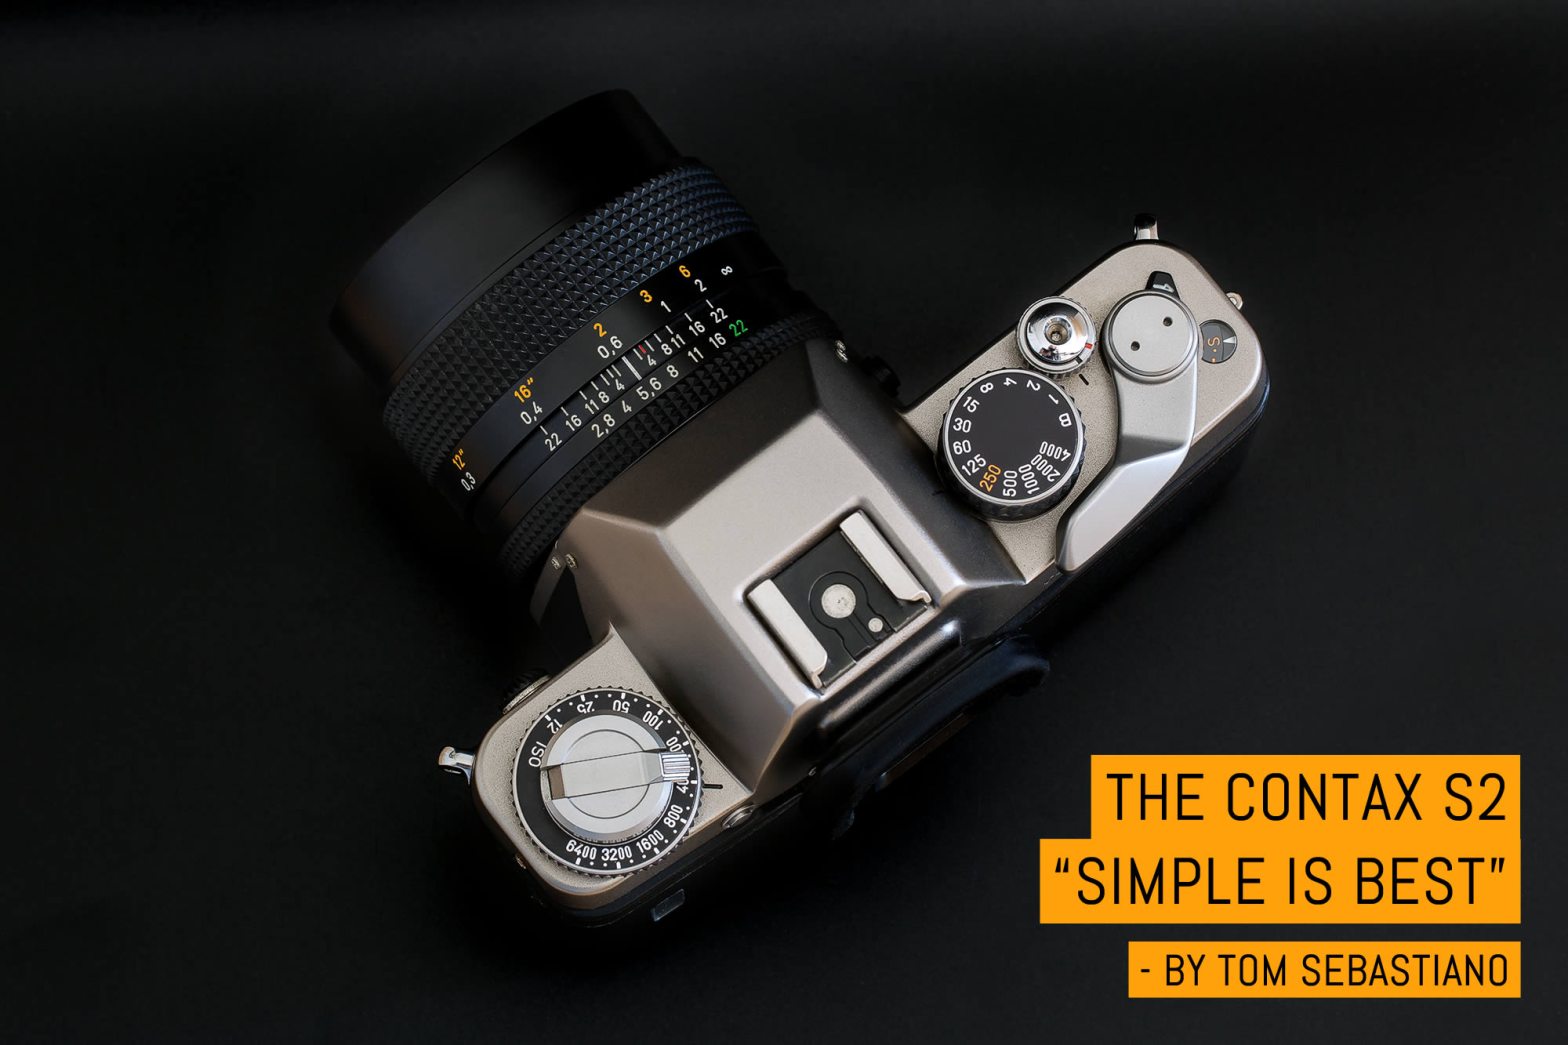 Camera review: the Contax S2, “Simple is Best”